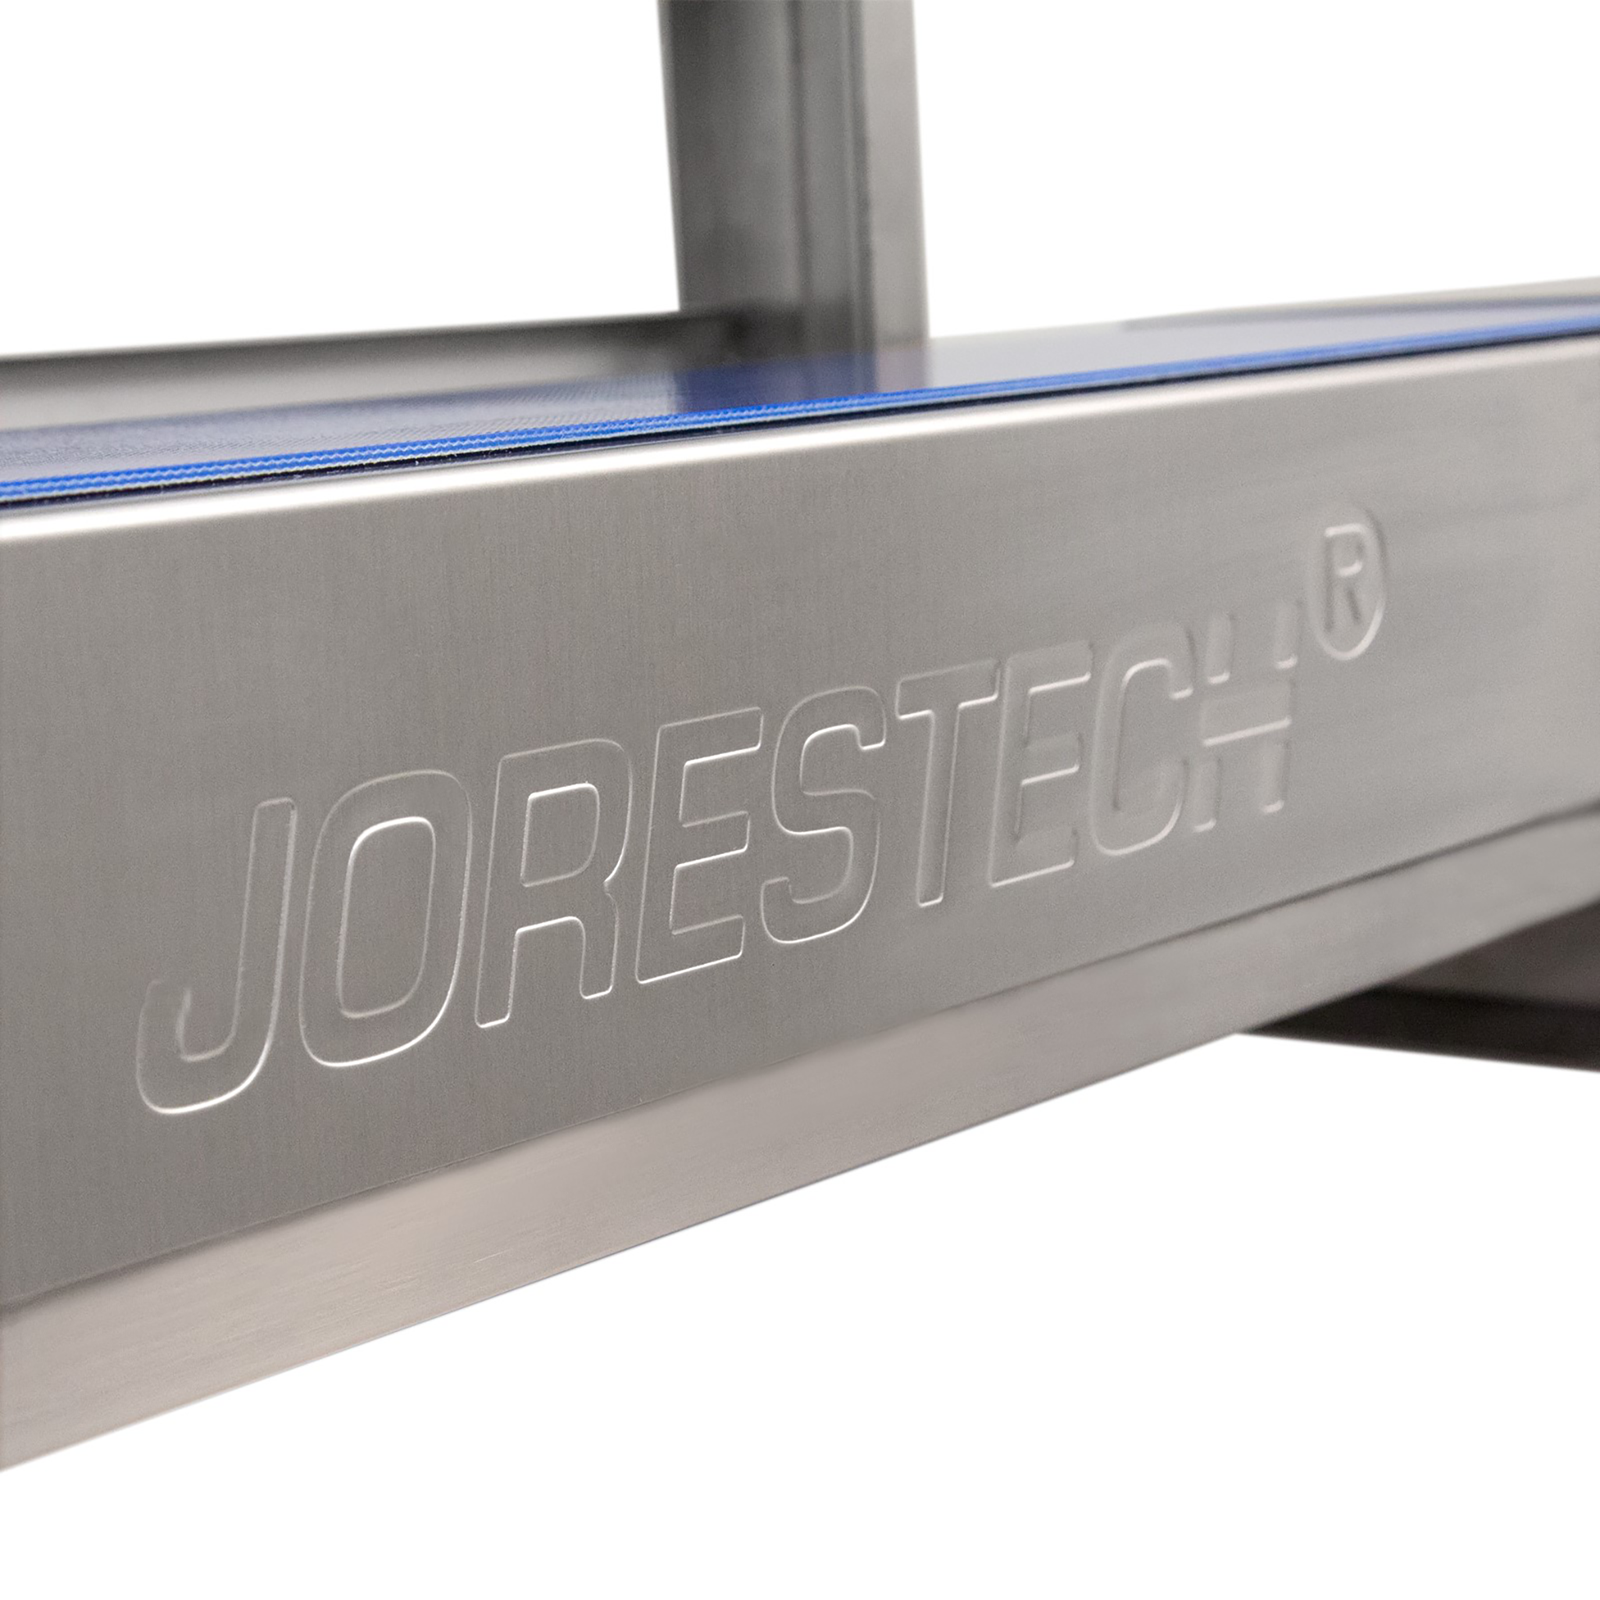 jorestech logo etched on stainless steel of the continuous band sealer